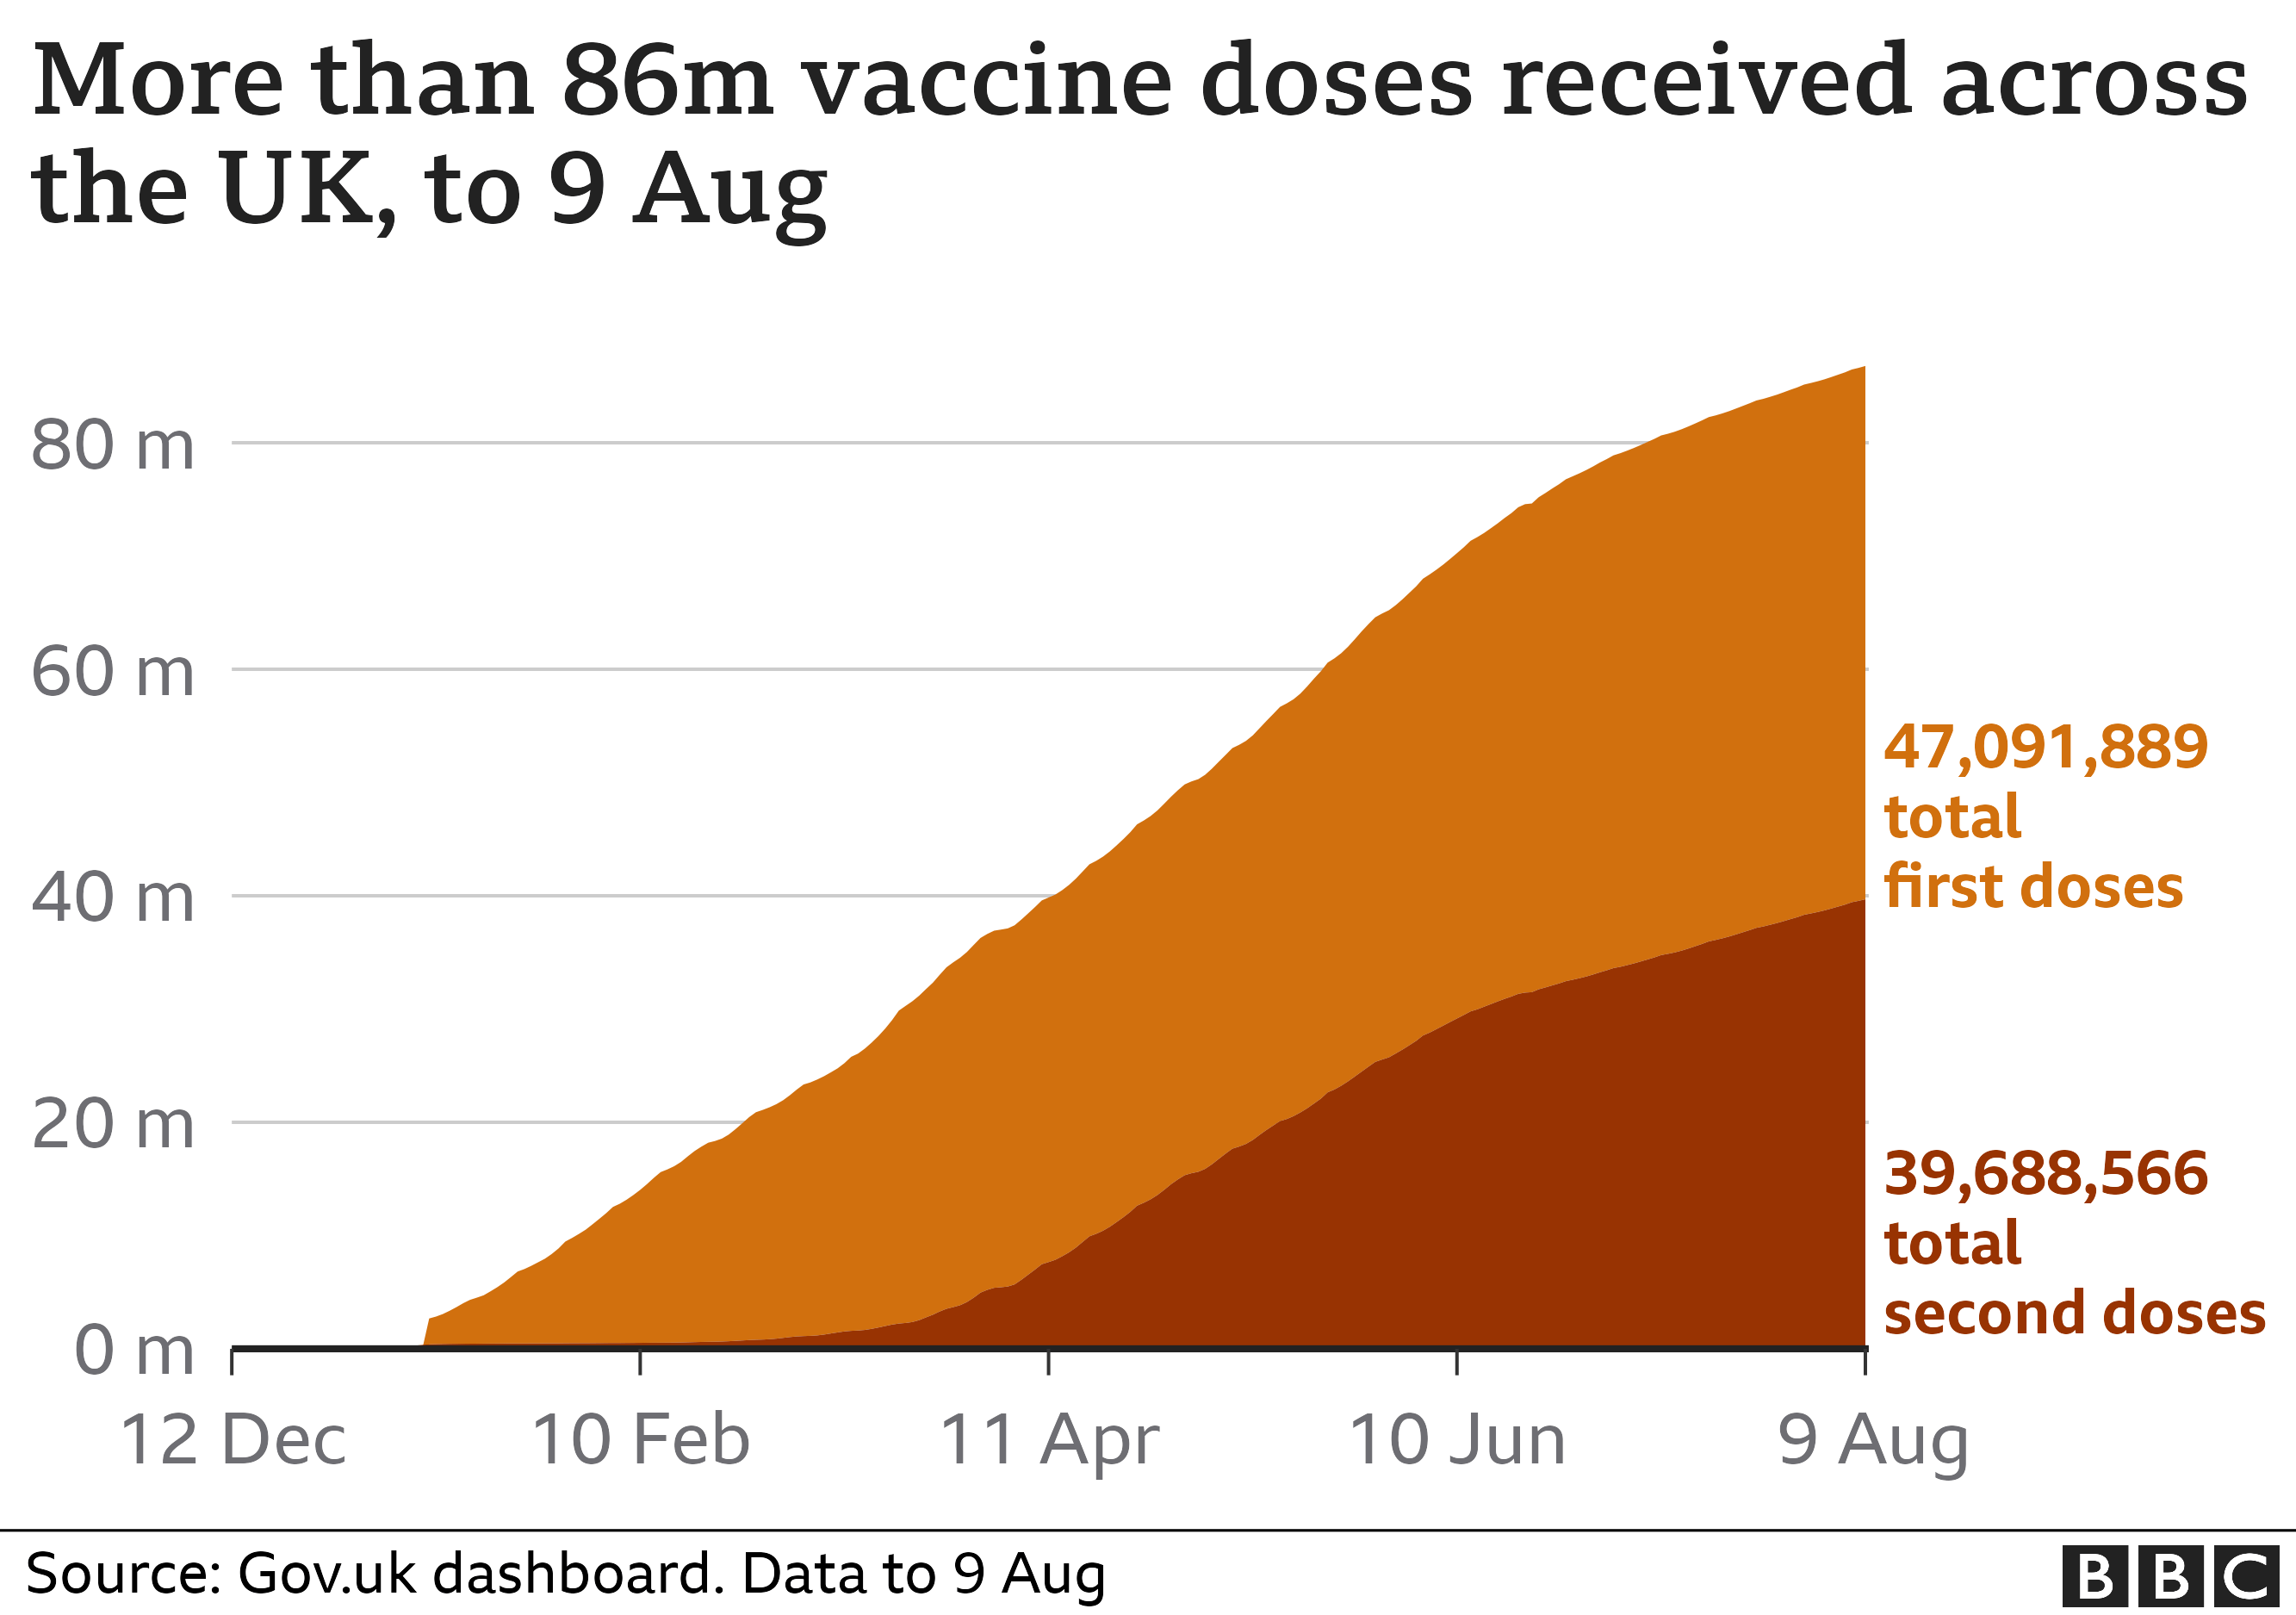 Vaccine doses received across UK